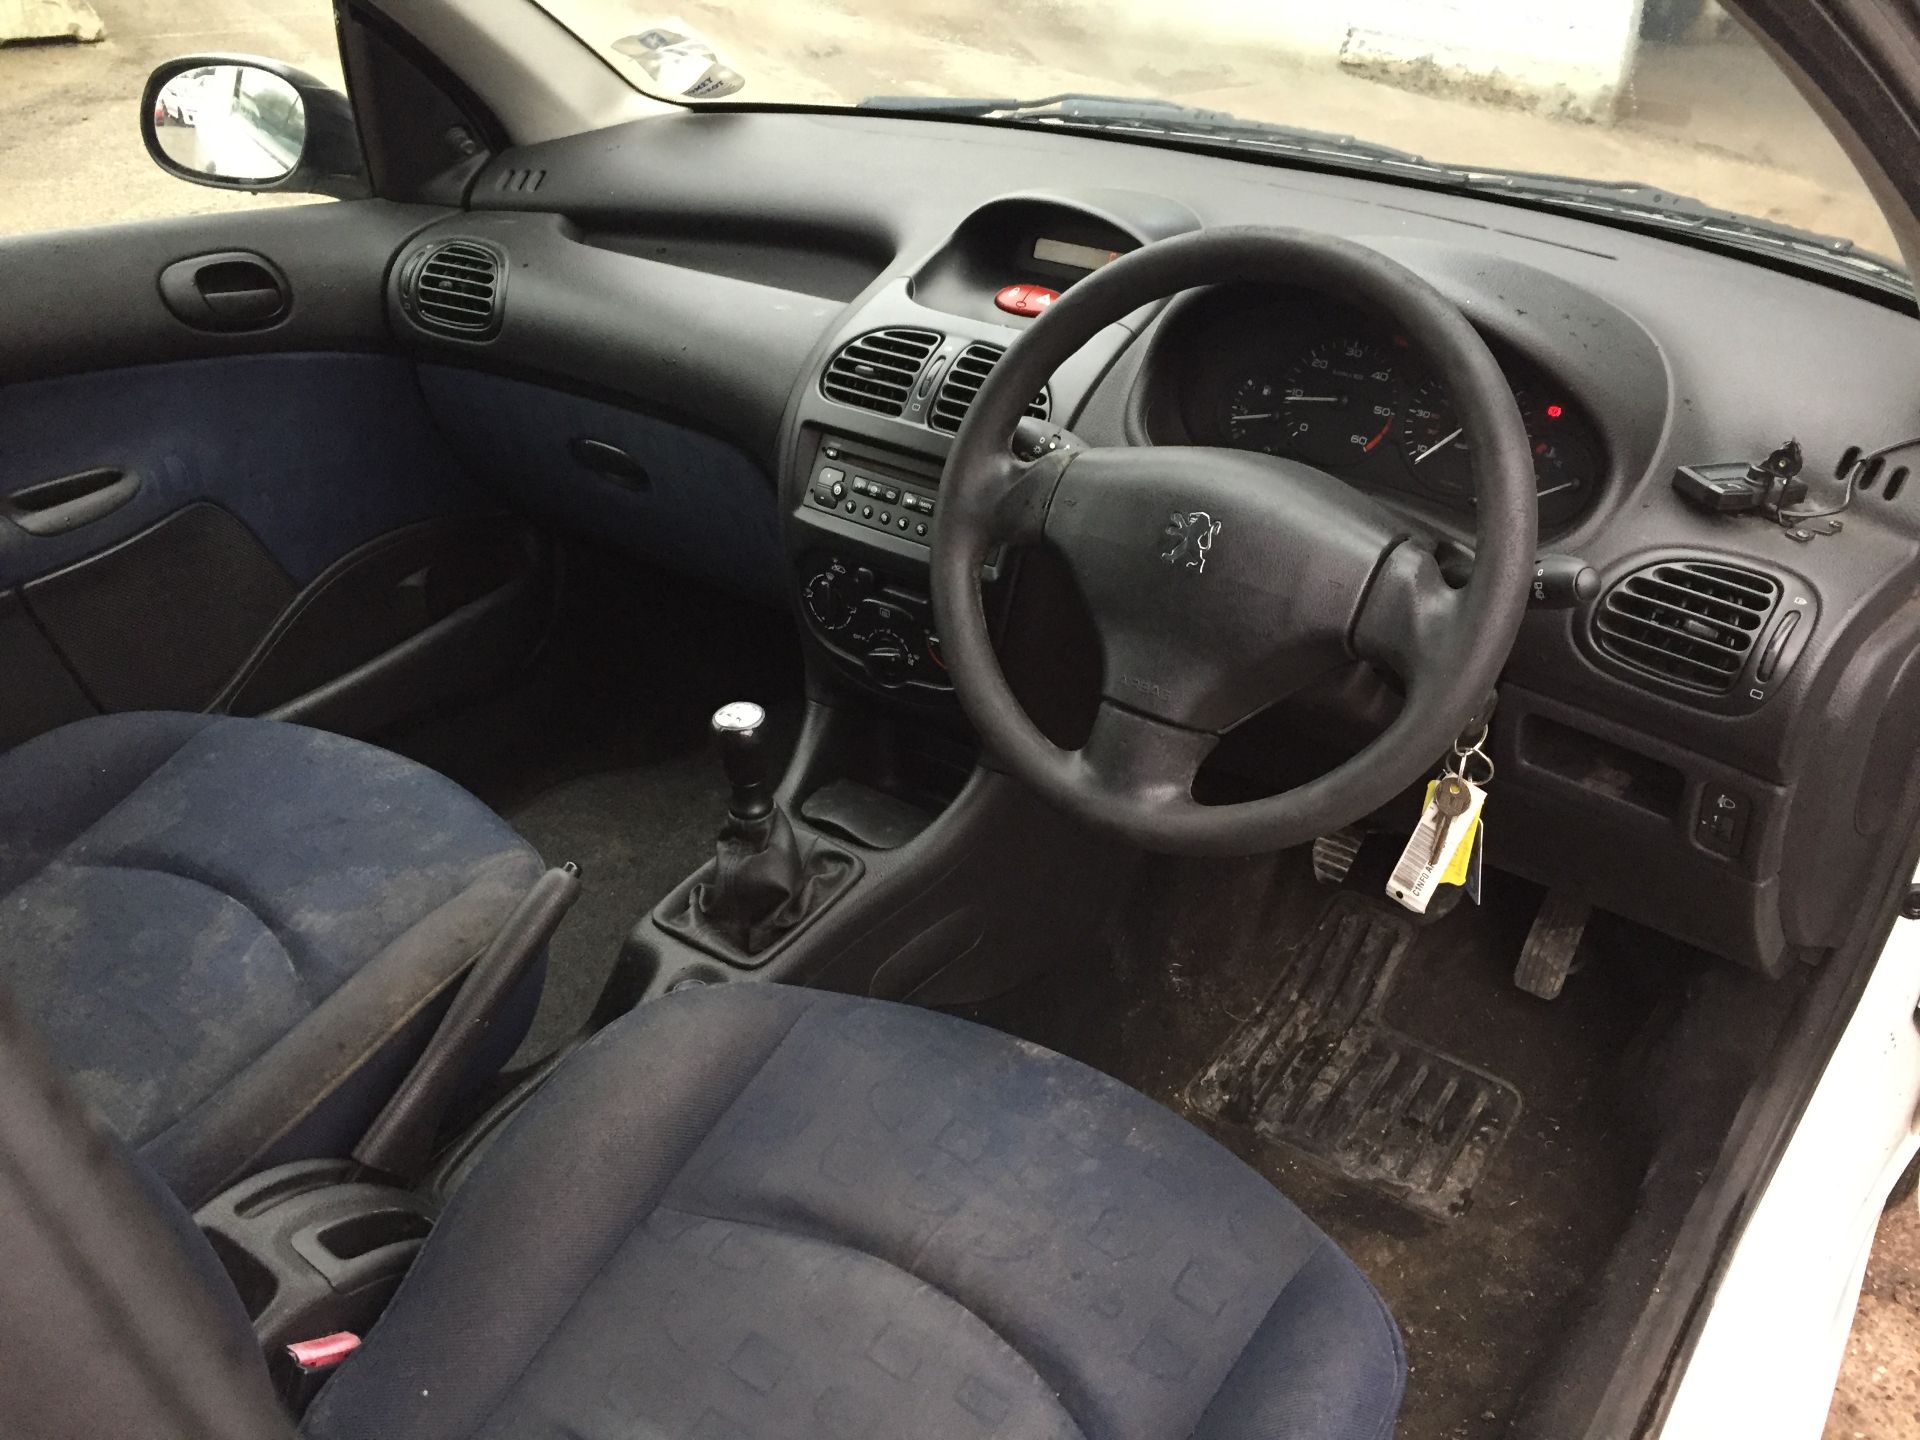 2005/05 REG PEUGEOT 206 HDI, 5 SPEED MANUAL, SHOWING 1 OWNER FROM NEW *NO VAT* - Image 13 of 16